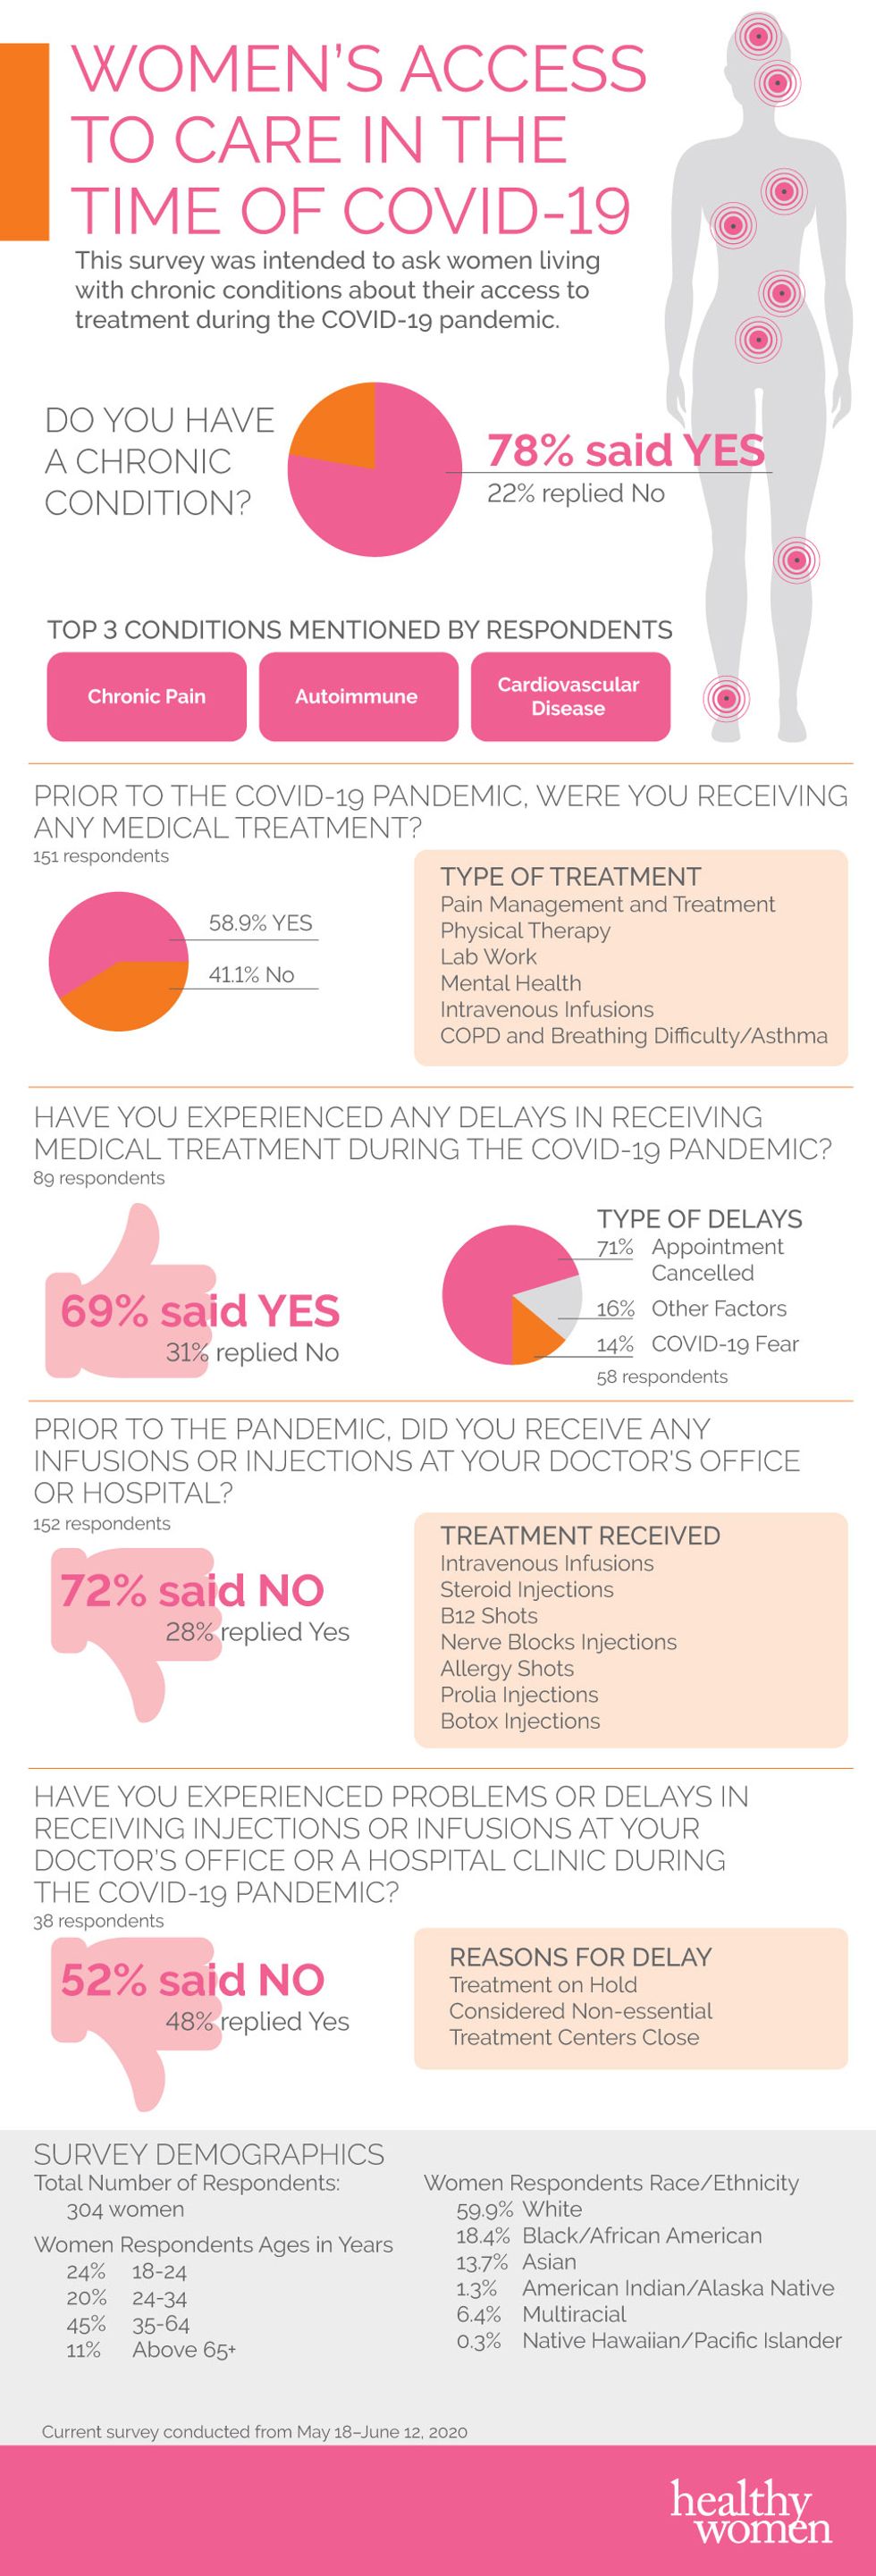 women's access to care in the time of covid-19 infographic